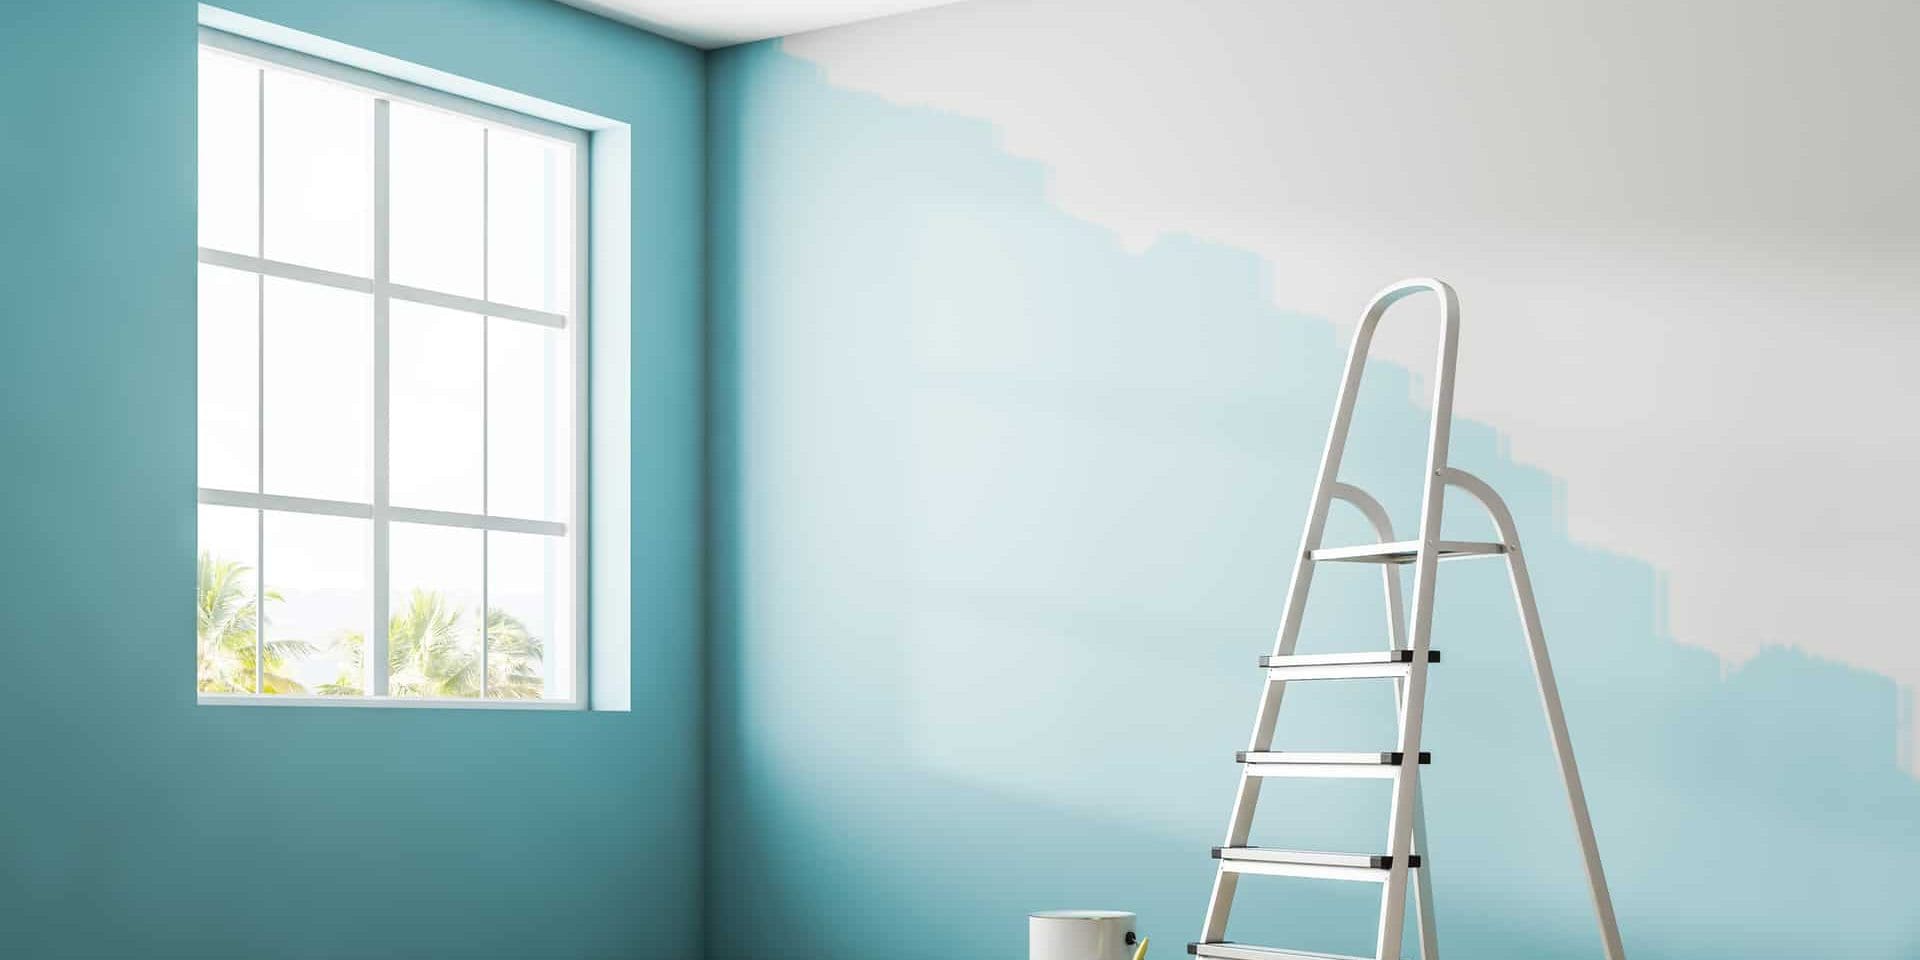 hire professional painters and decorators